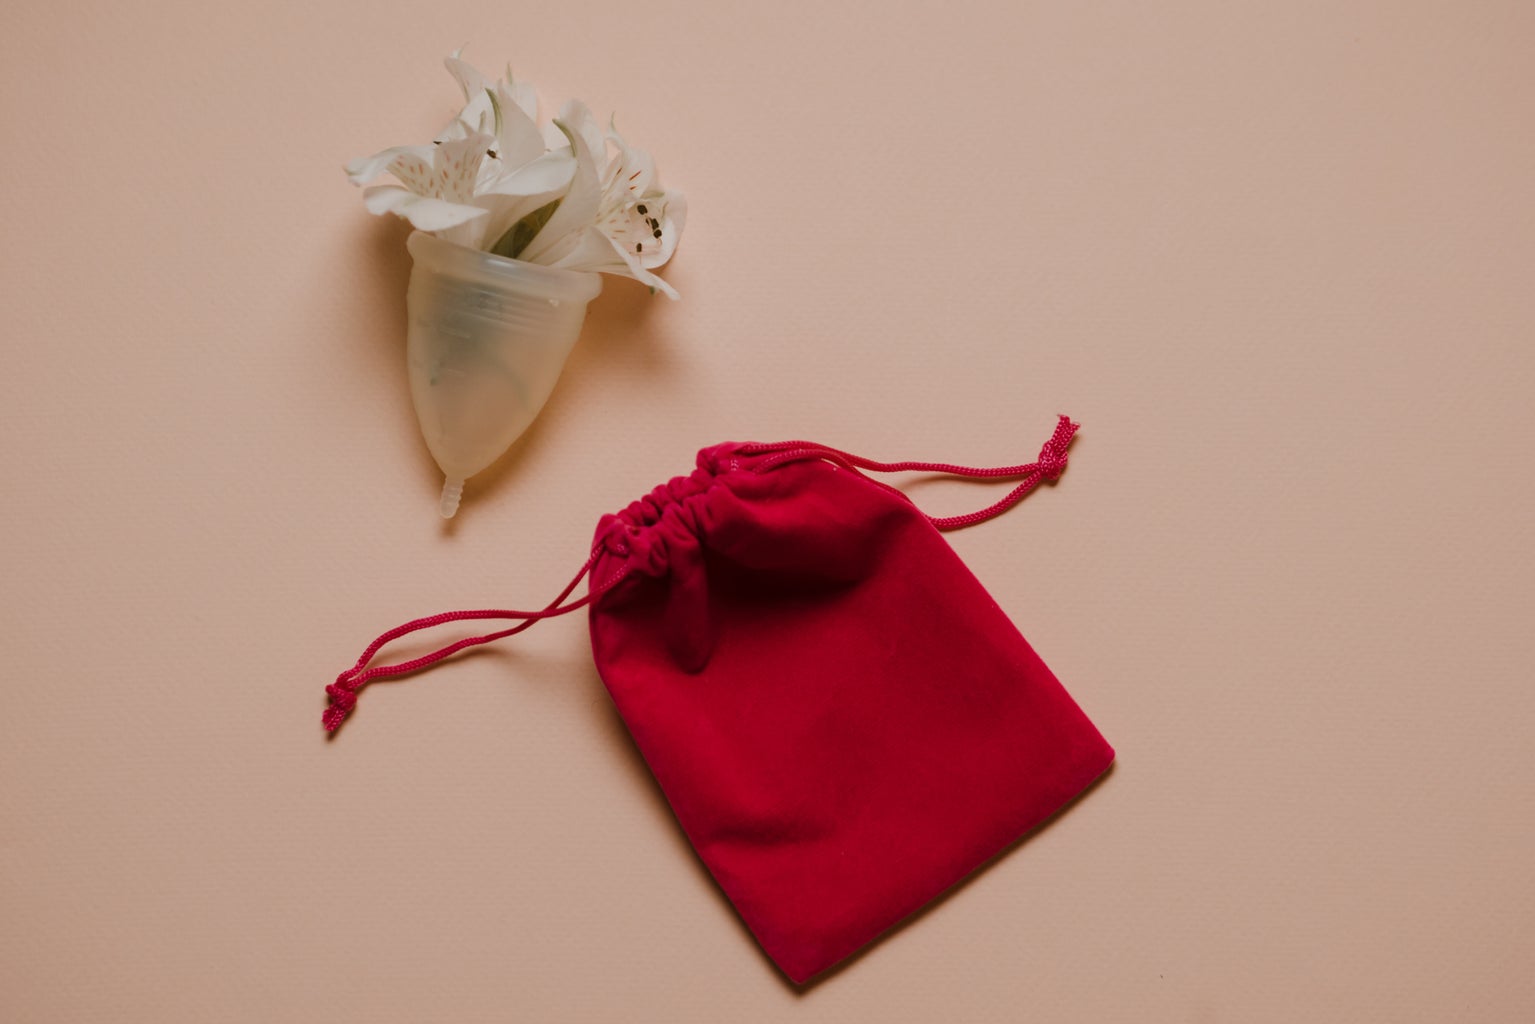 Menstrual cup with flowers